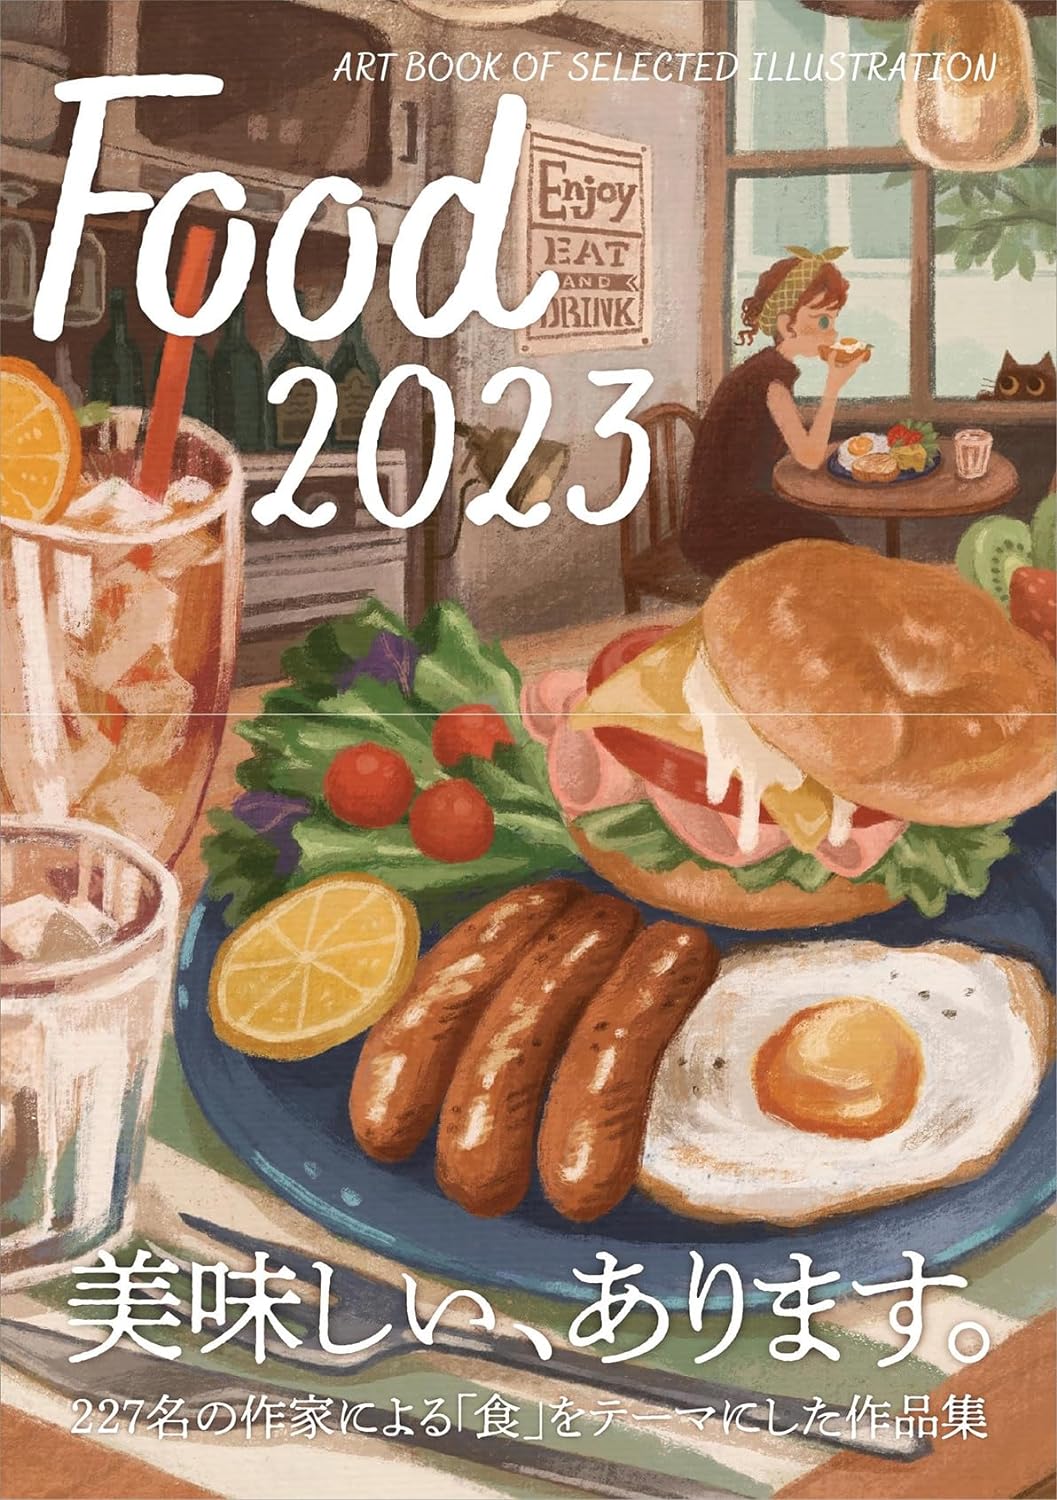 FOOD 2023 (ART BOOK OF SELECTED ILLUSTRATION)